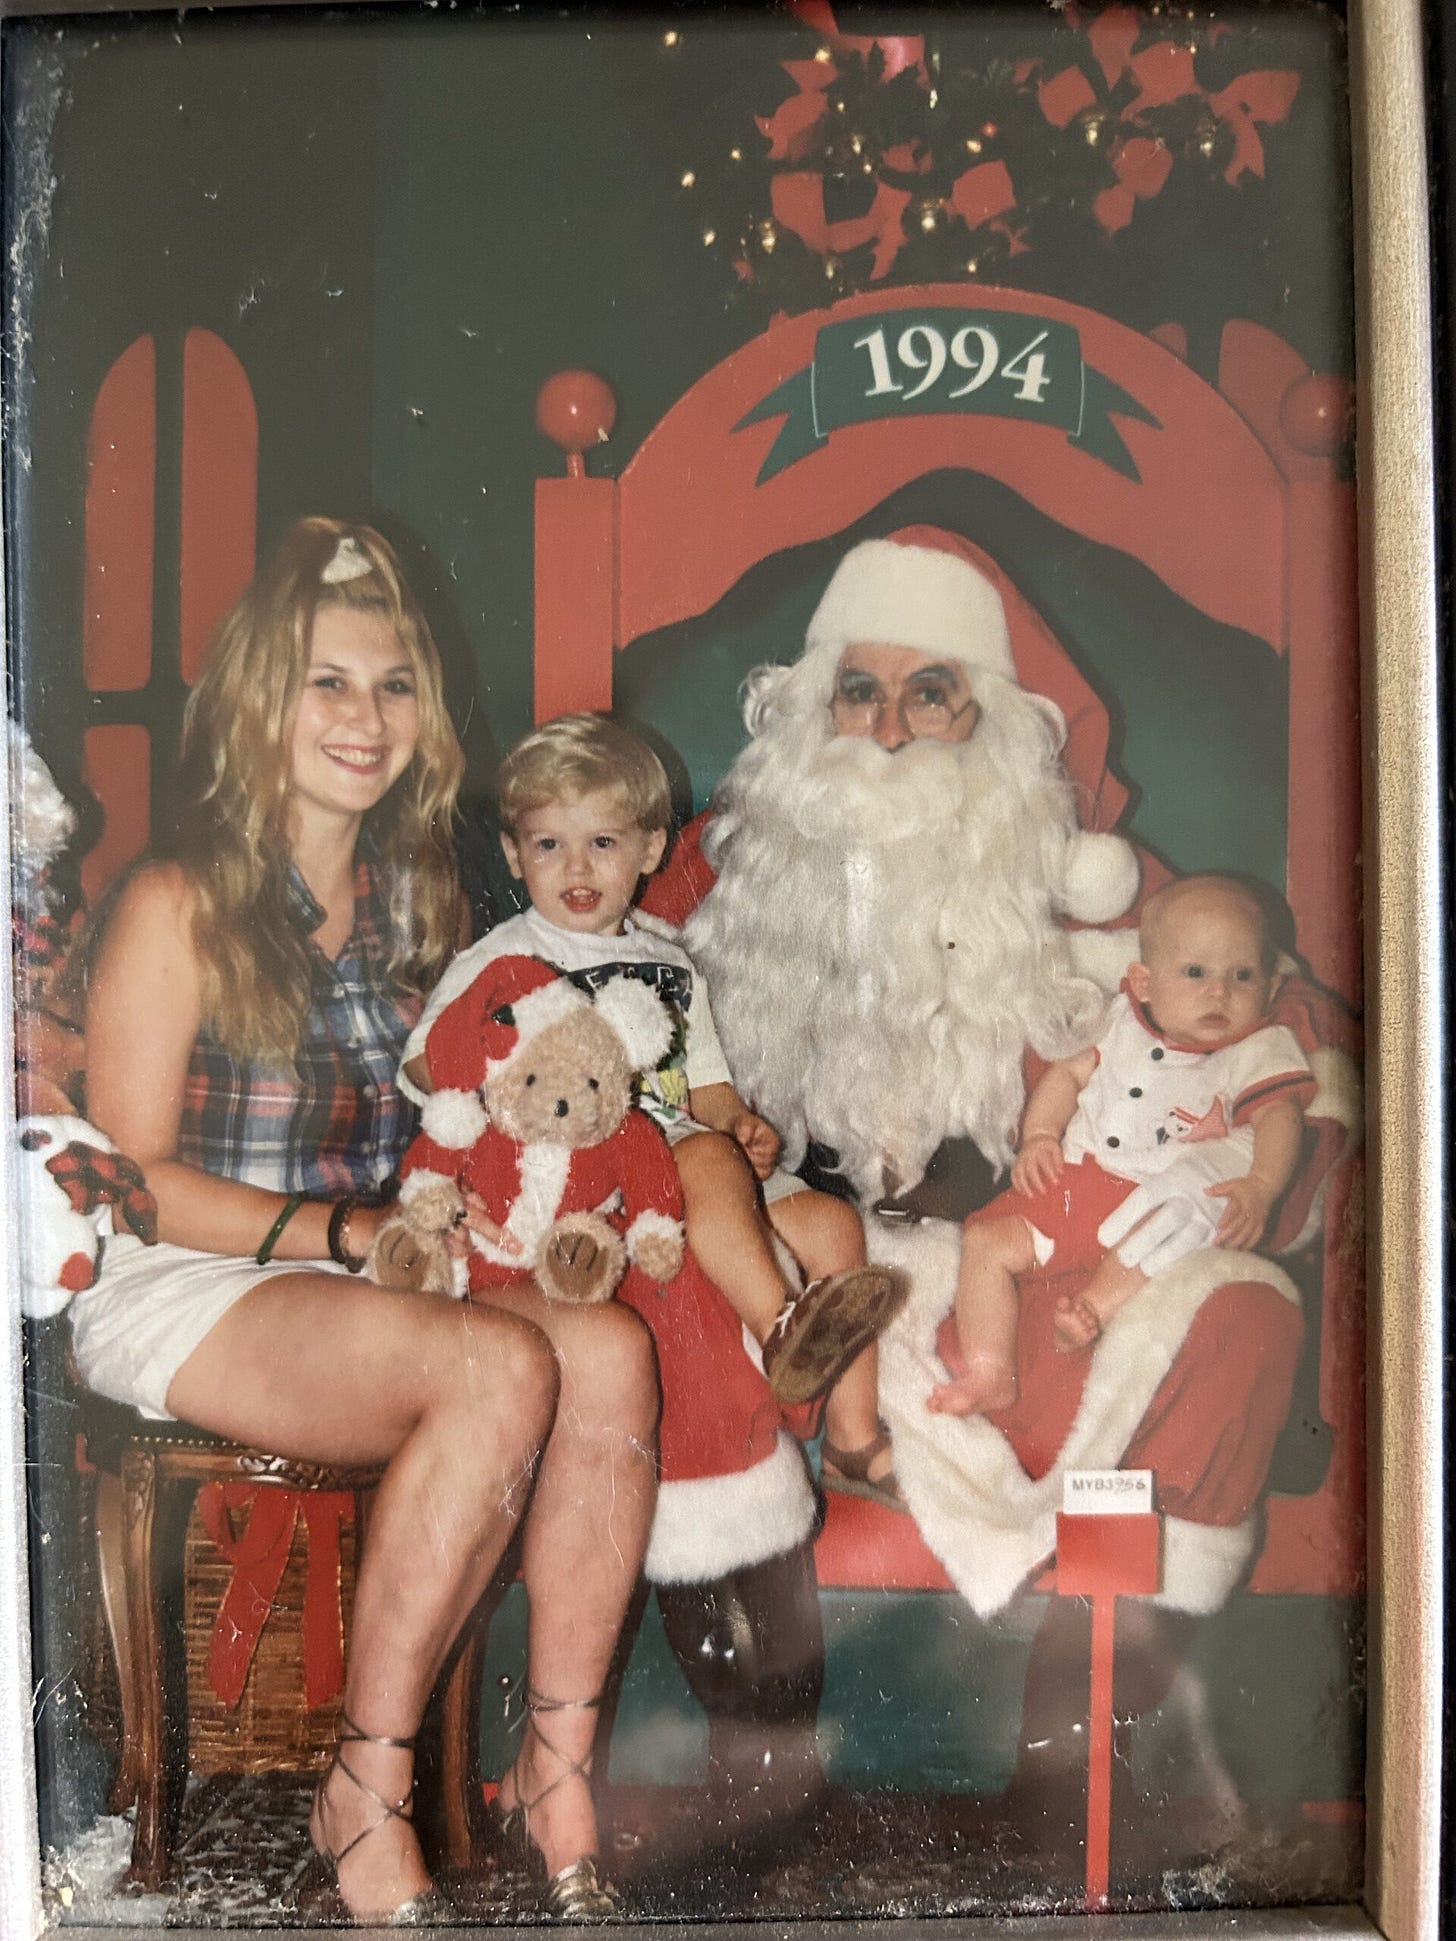 Family Christmas photo with Tammy and her two young boys sitting on Santa's lap